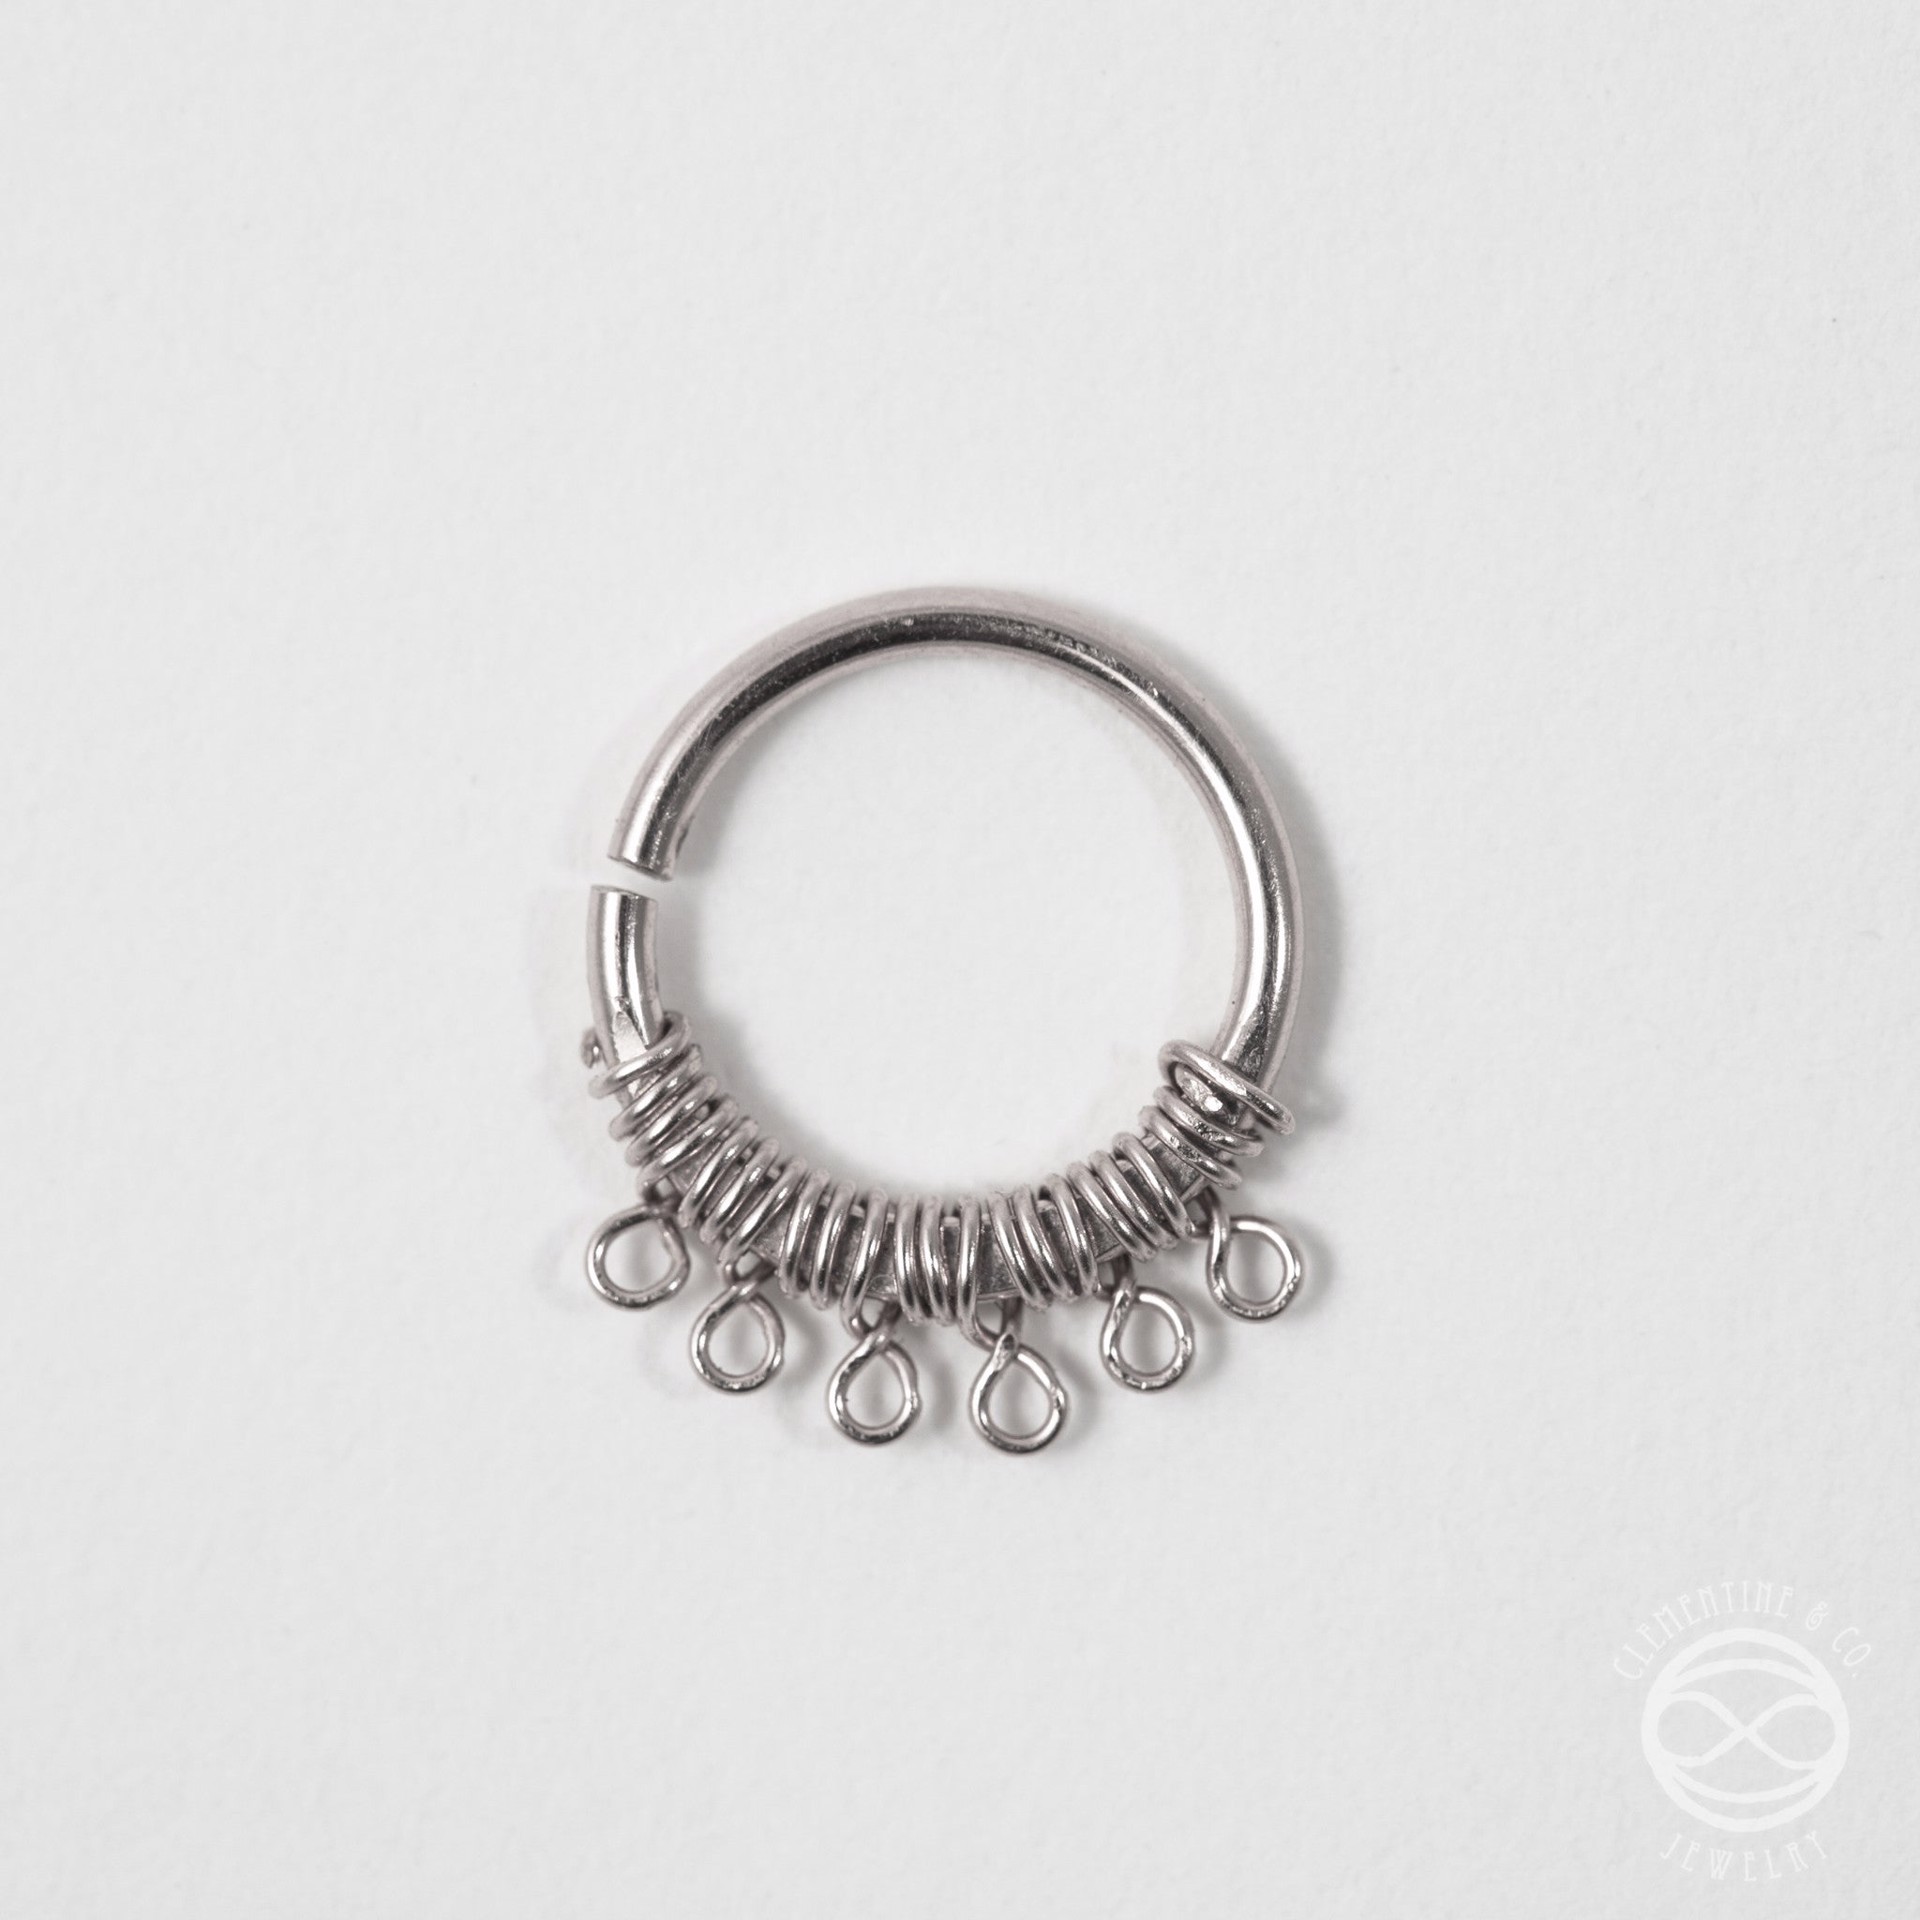 Filigree Septum Ring in Silver - 18 / 7mm by Clementine & Co. Jewelry